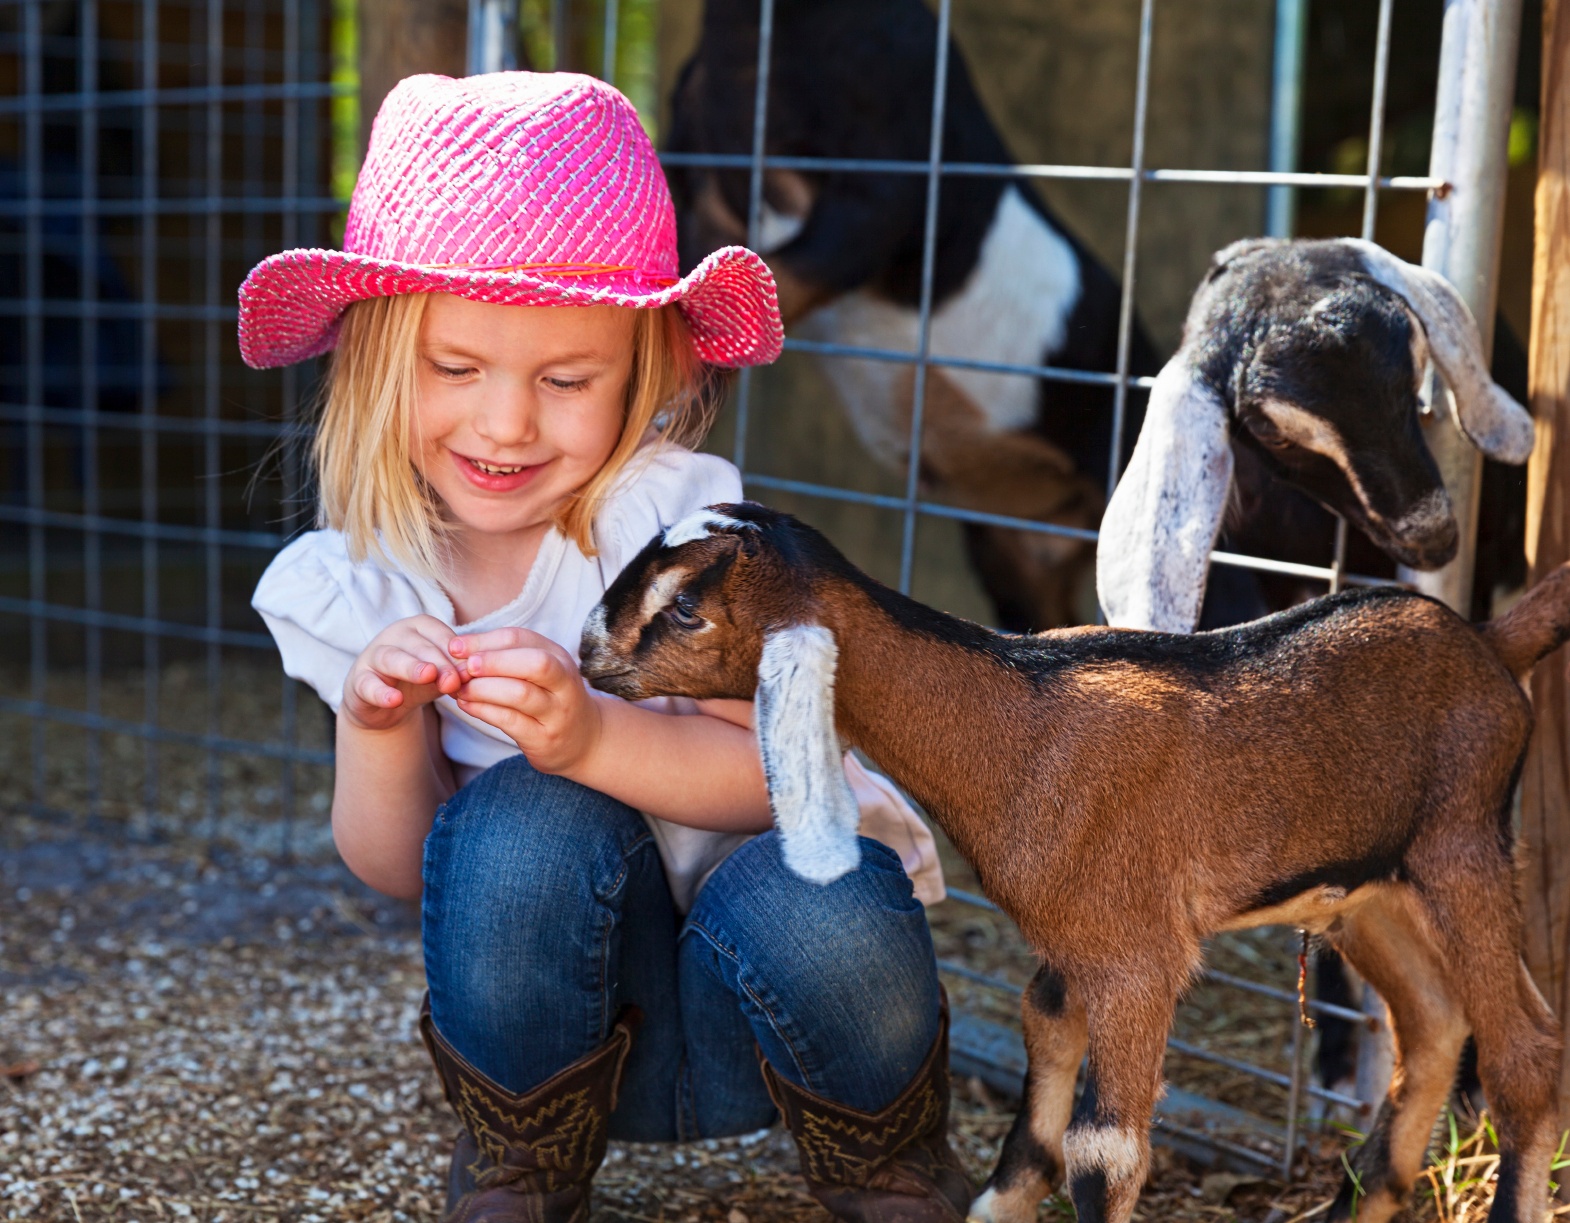 Child with baby goat guided by her inner teacher